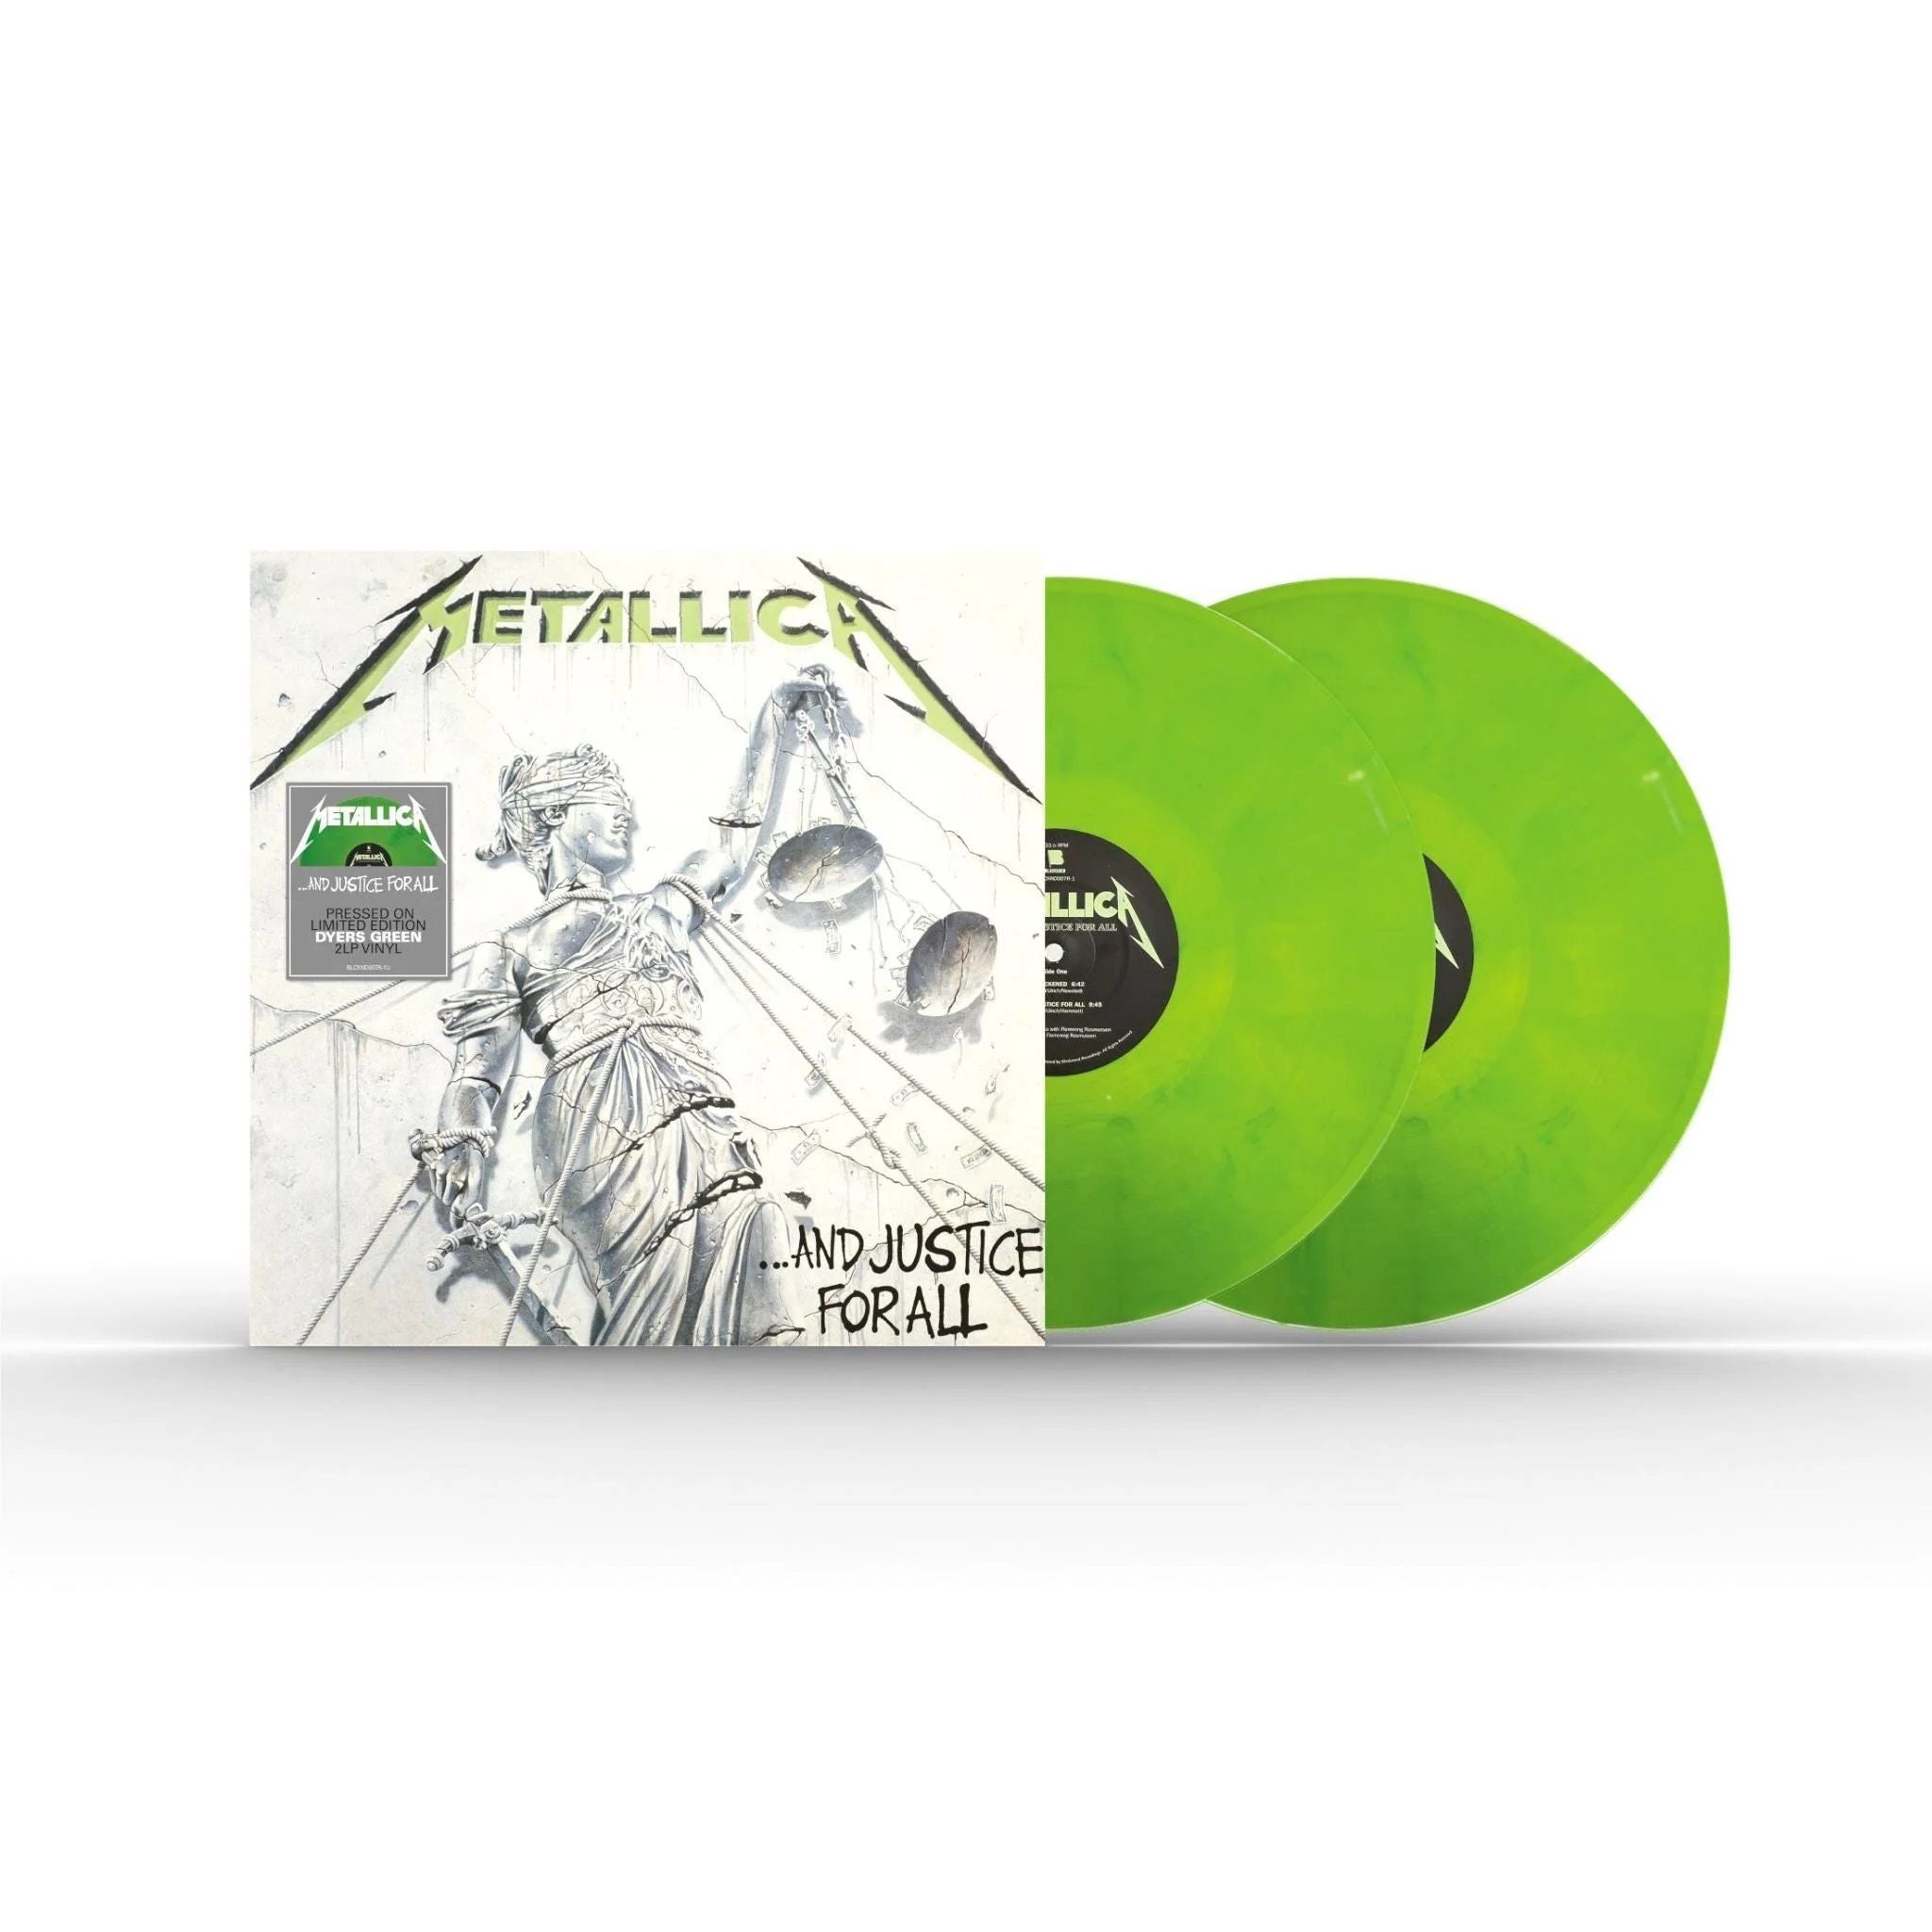 Metallica - And Justice For All (Ltd. Ed. 2LP Dyers Green vinyl reissue) - Vinyl - New